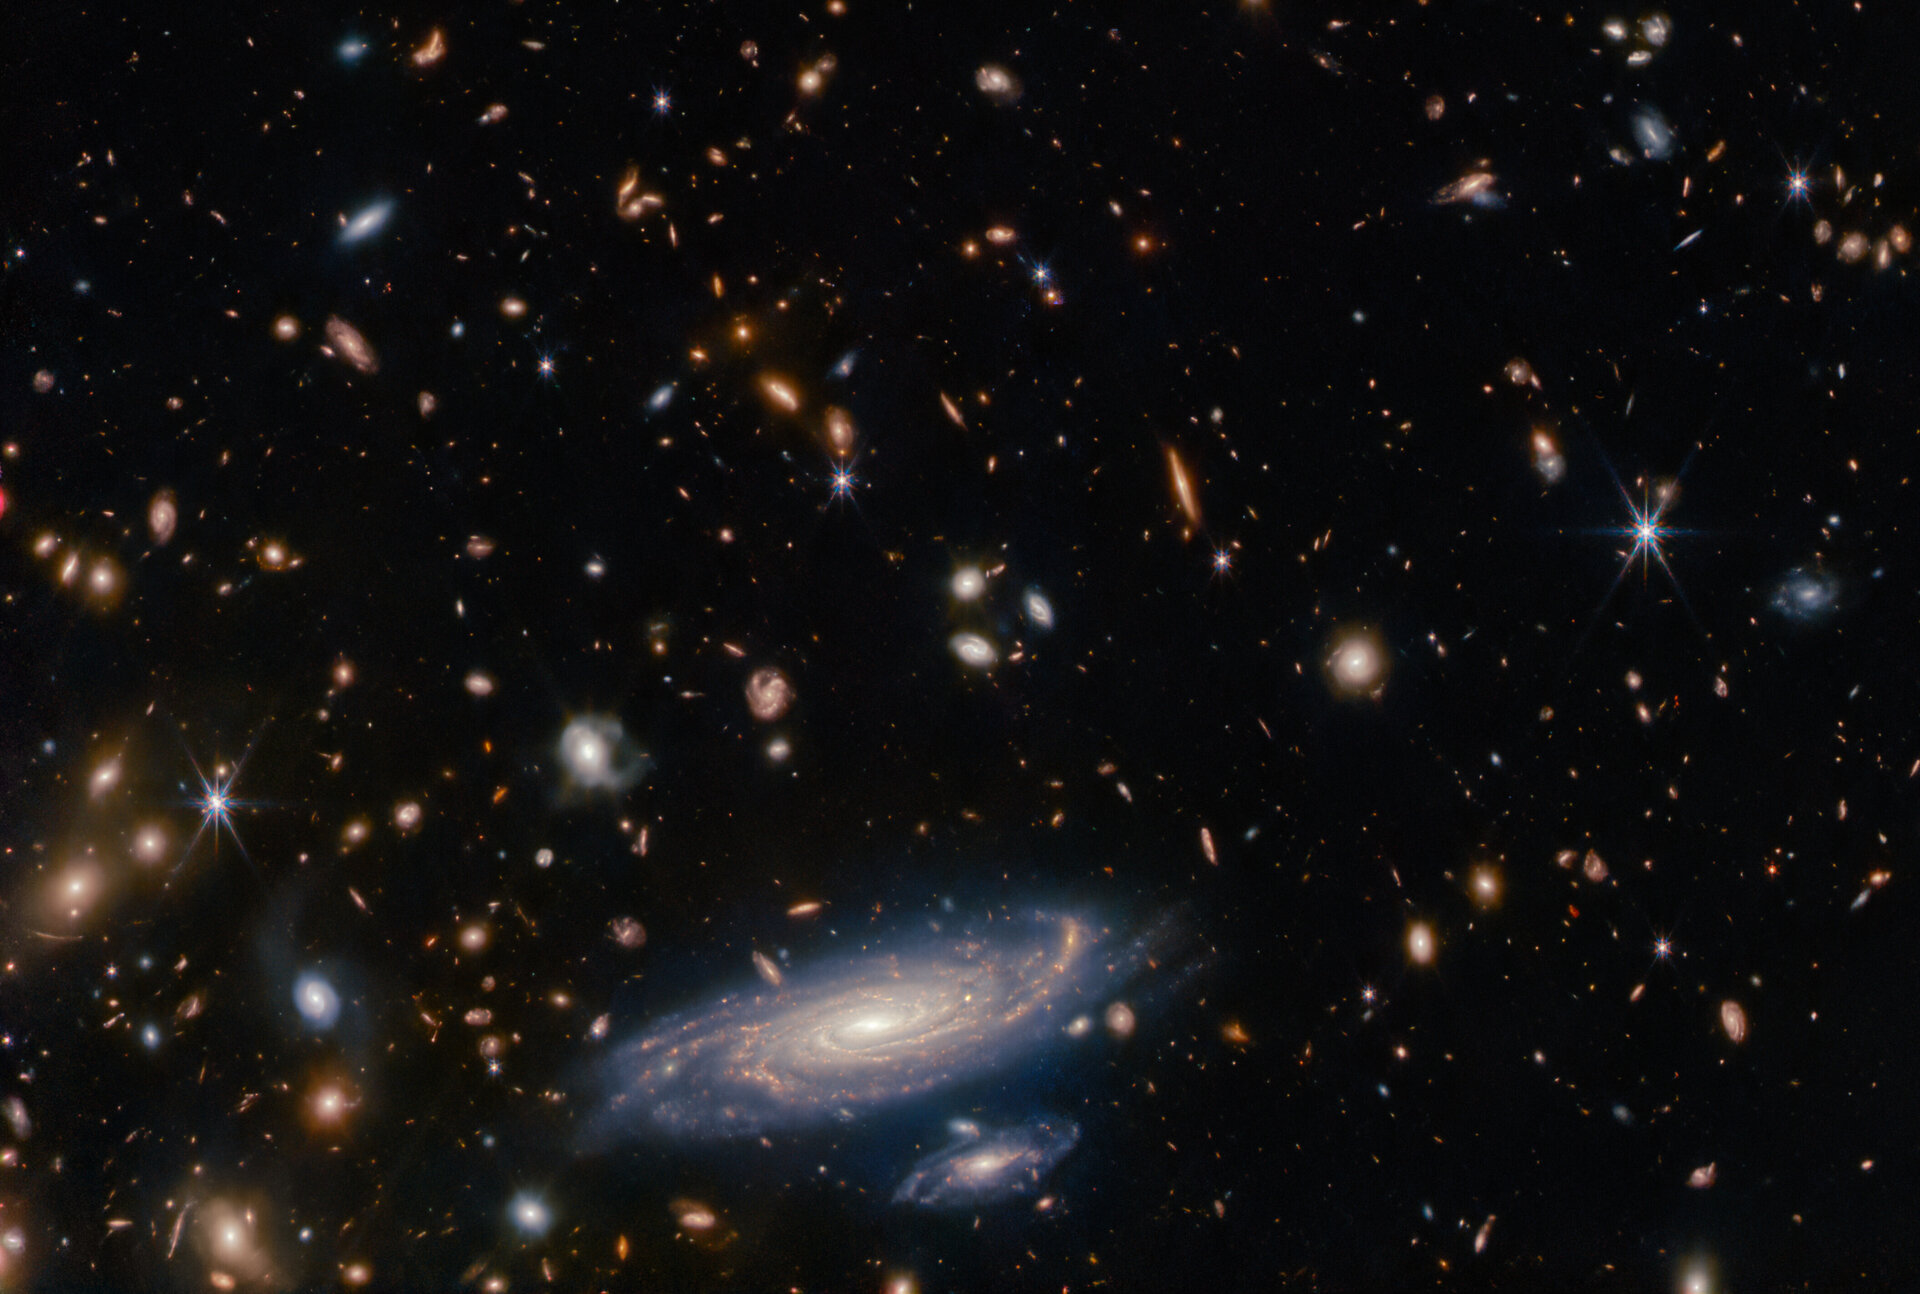 Webb captures a crowded field of galaxies: Check out this spectacular pic